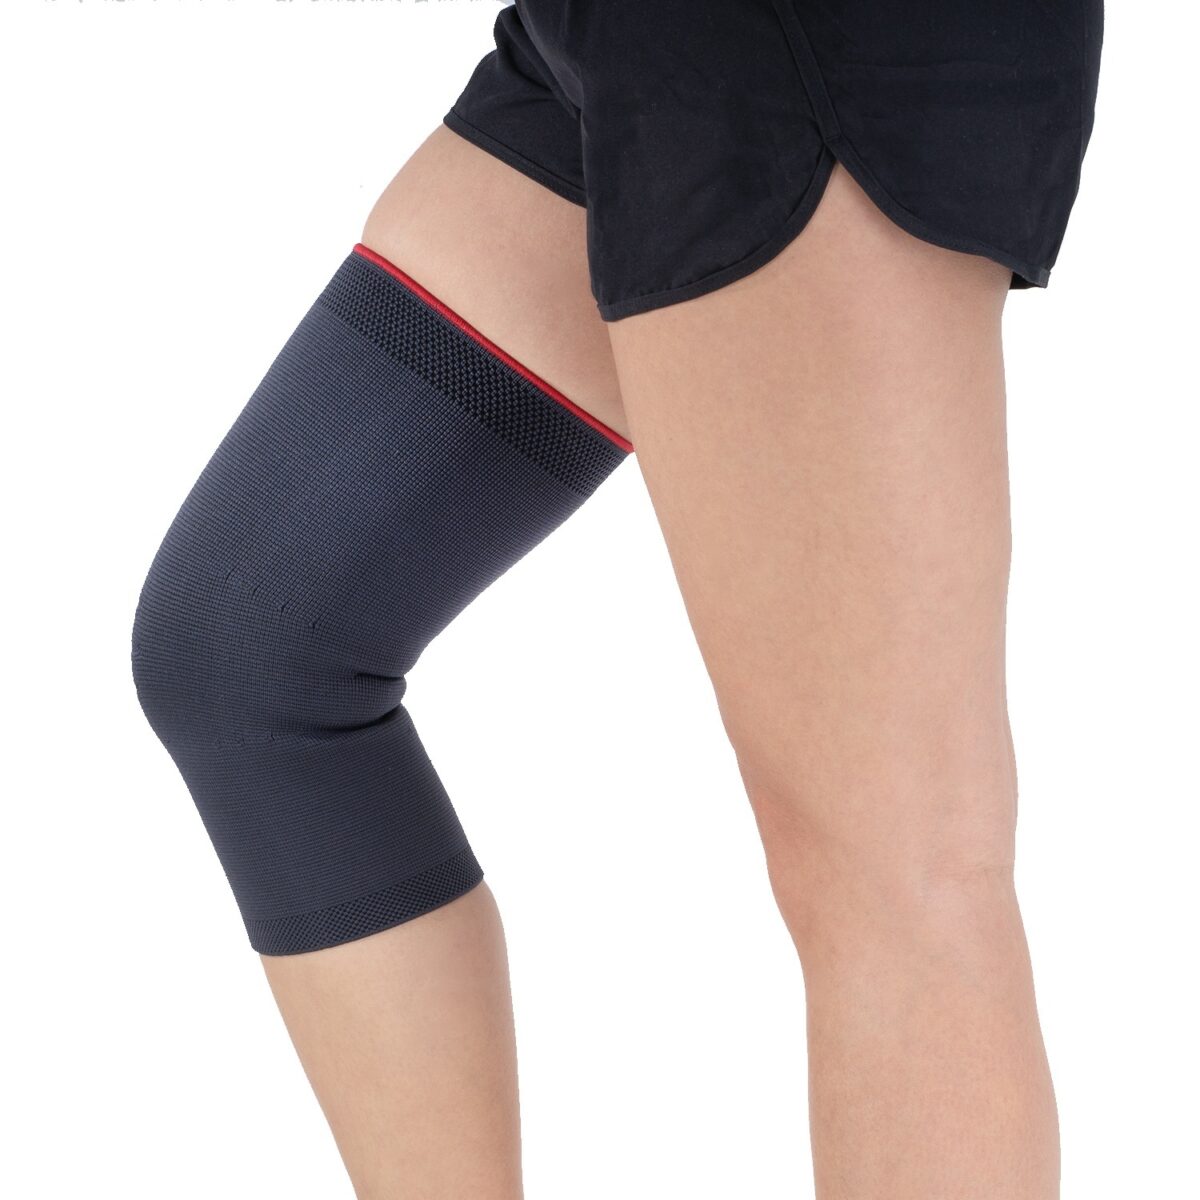 wingmed orthopedic equipments W501 woven knee support 91